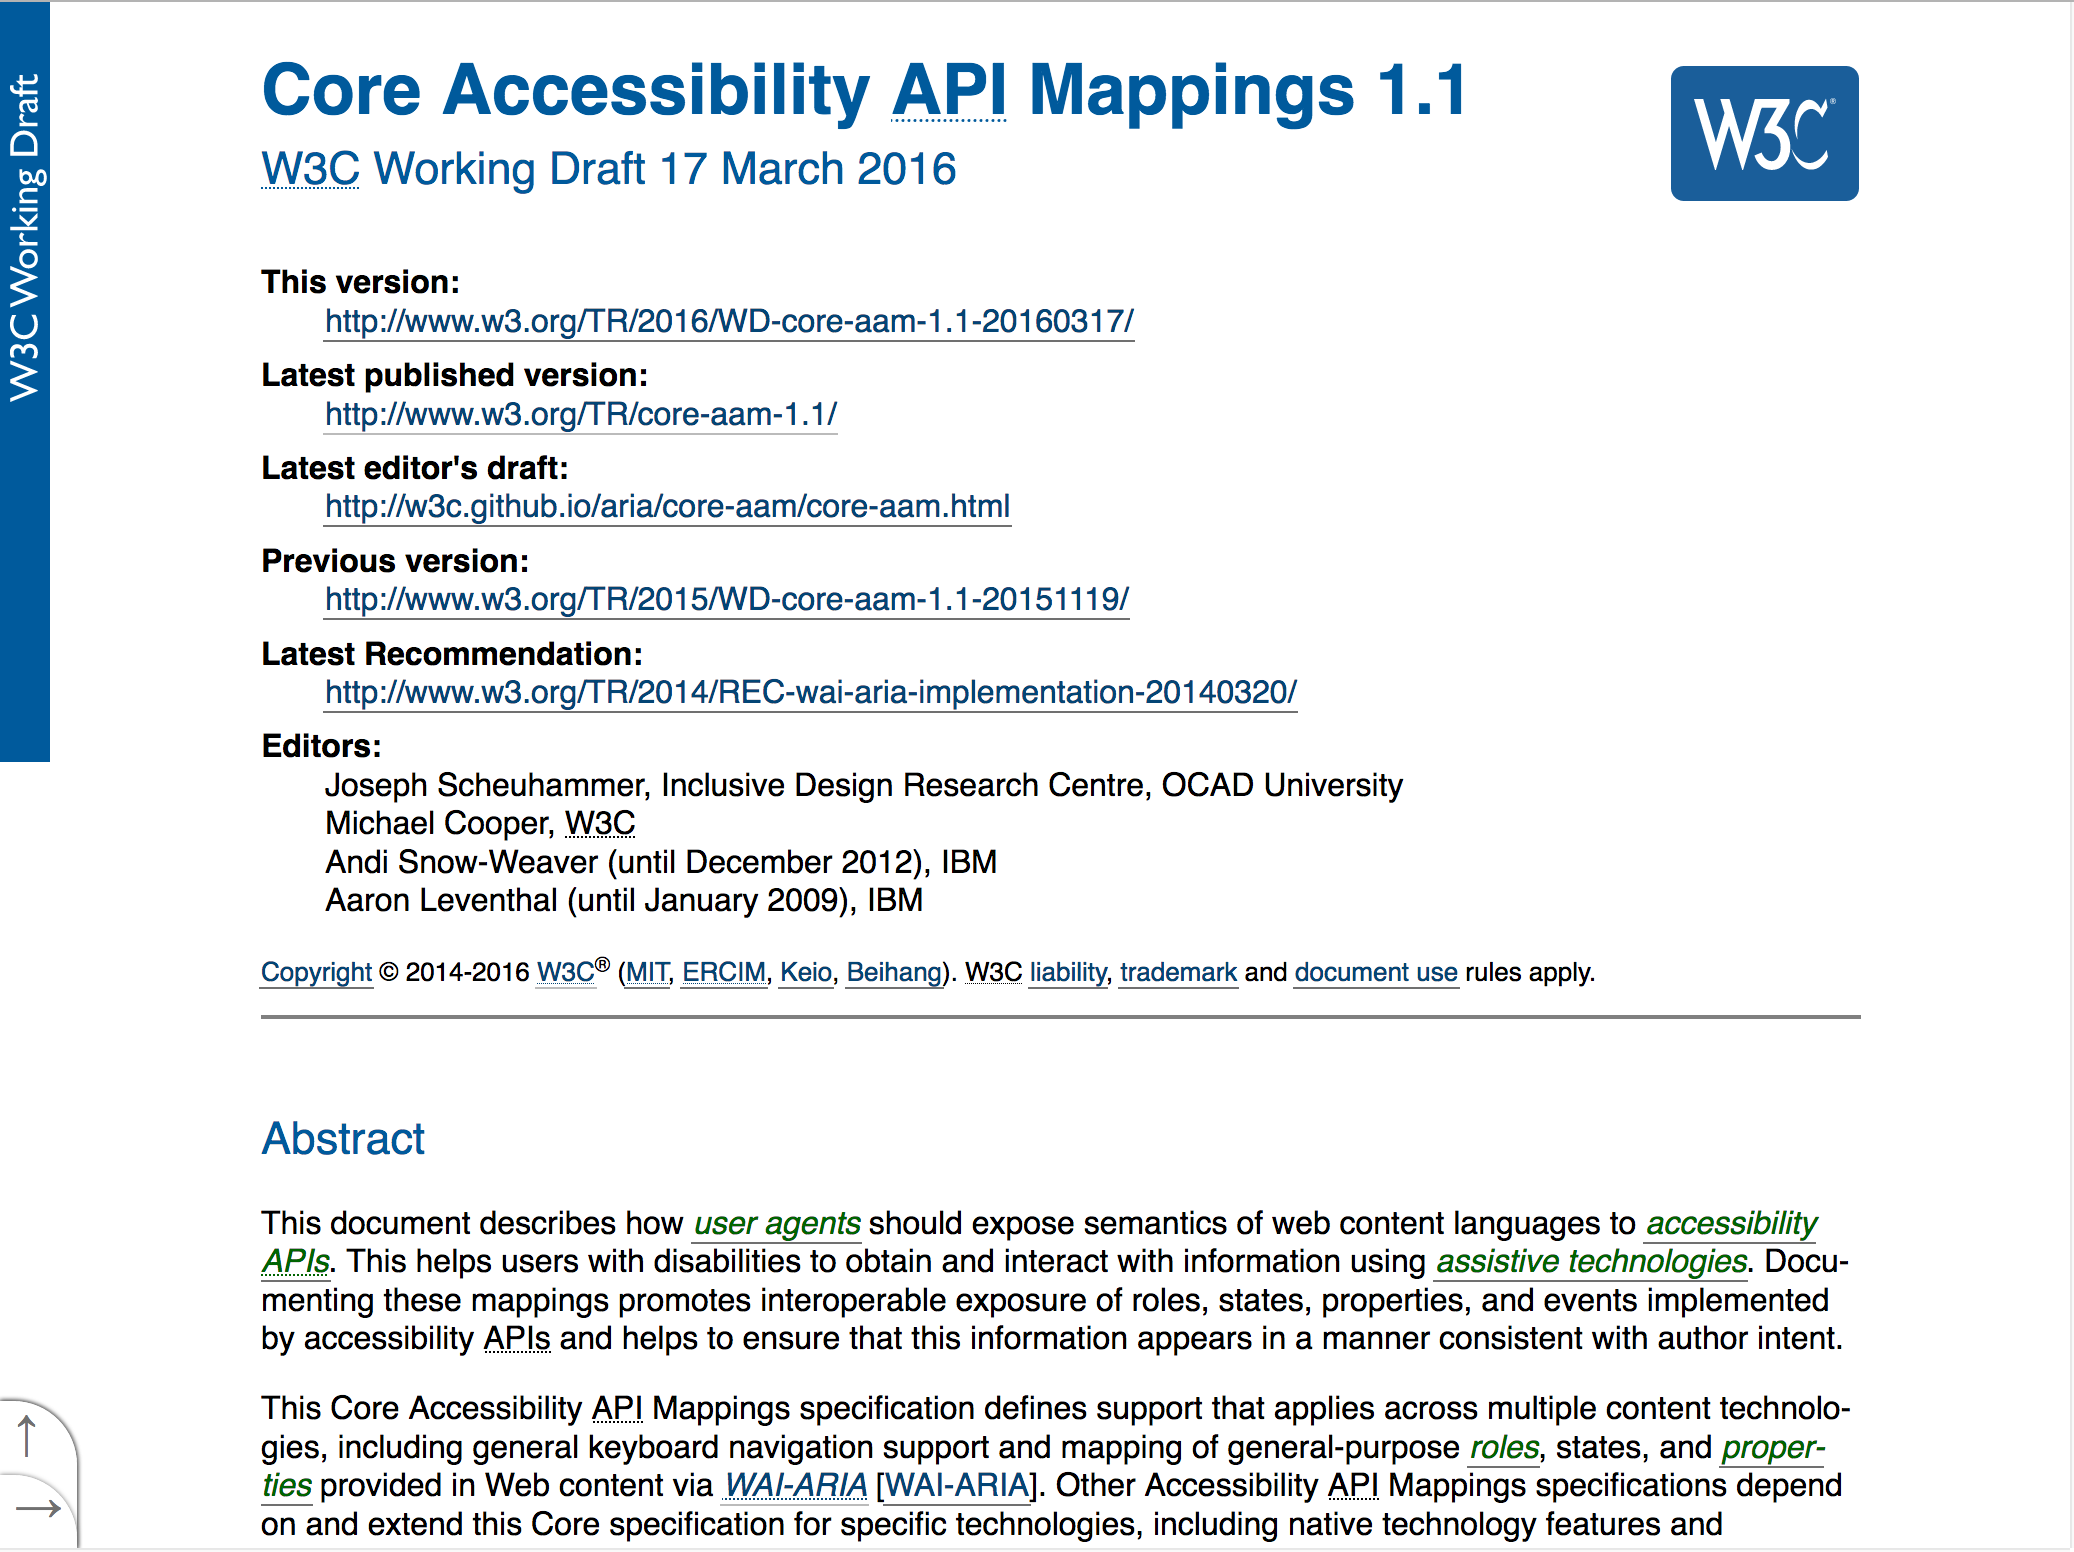 Graphical browser rendering of ARIA API Mappings 1.1 Specification